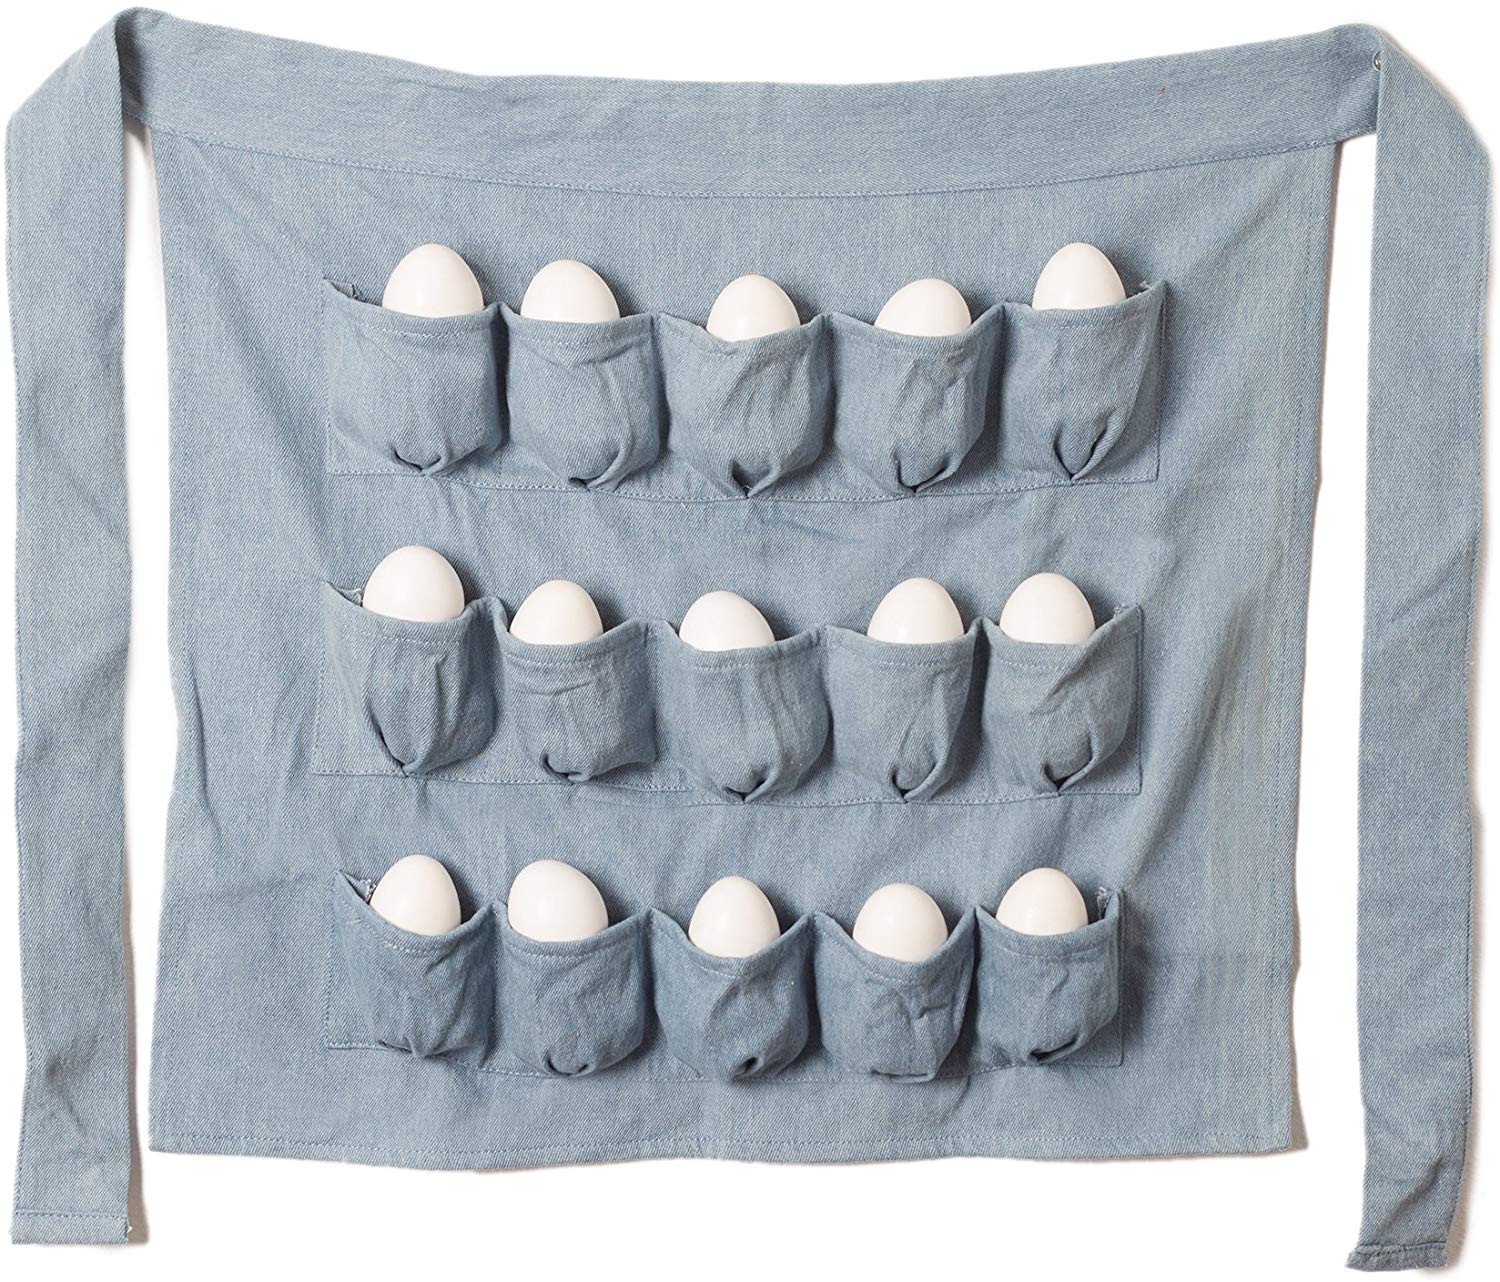 Denim Chicken Egg Apron, 15 Pockets! Men and Women Egg Gathering and Collecting Apron